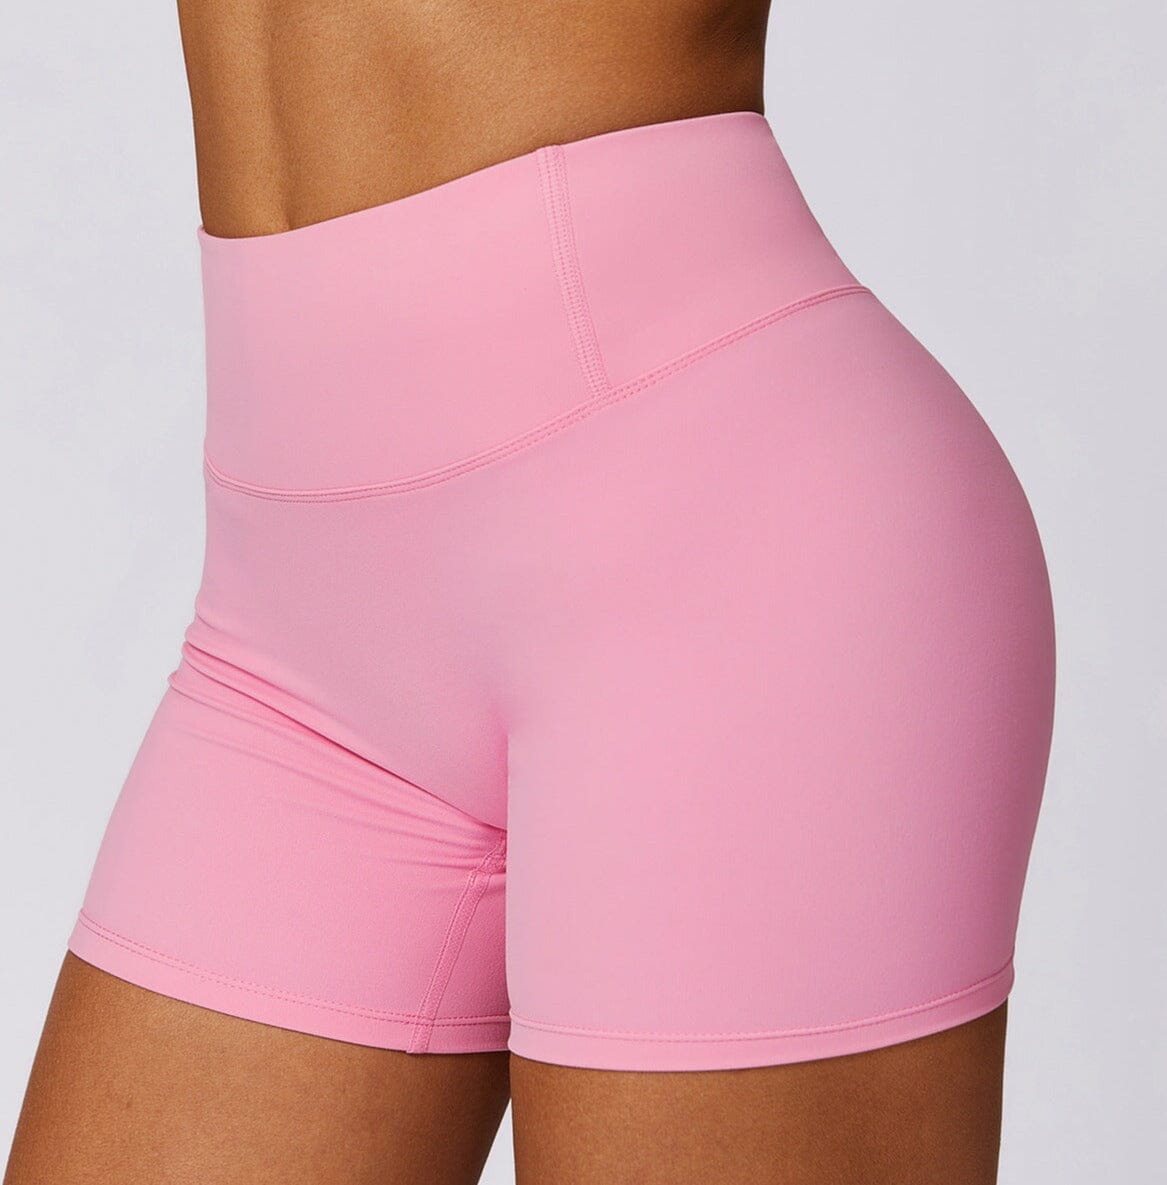 Movers Scrunch Shorts Shorts Starlethics Pink S 